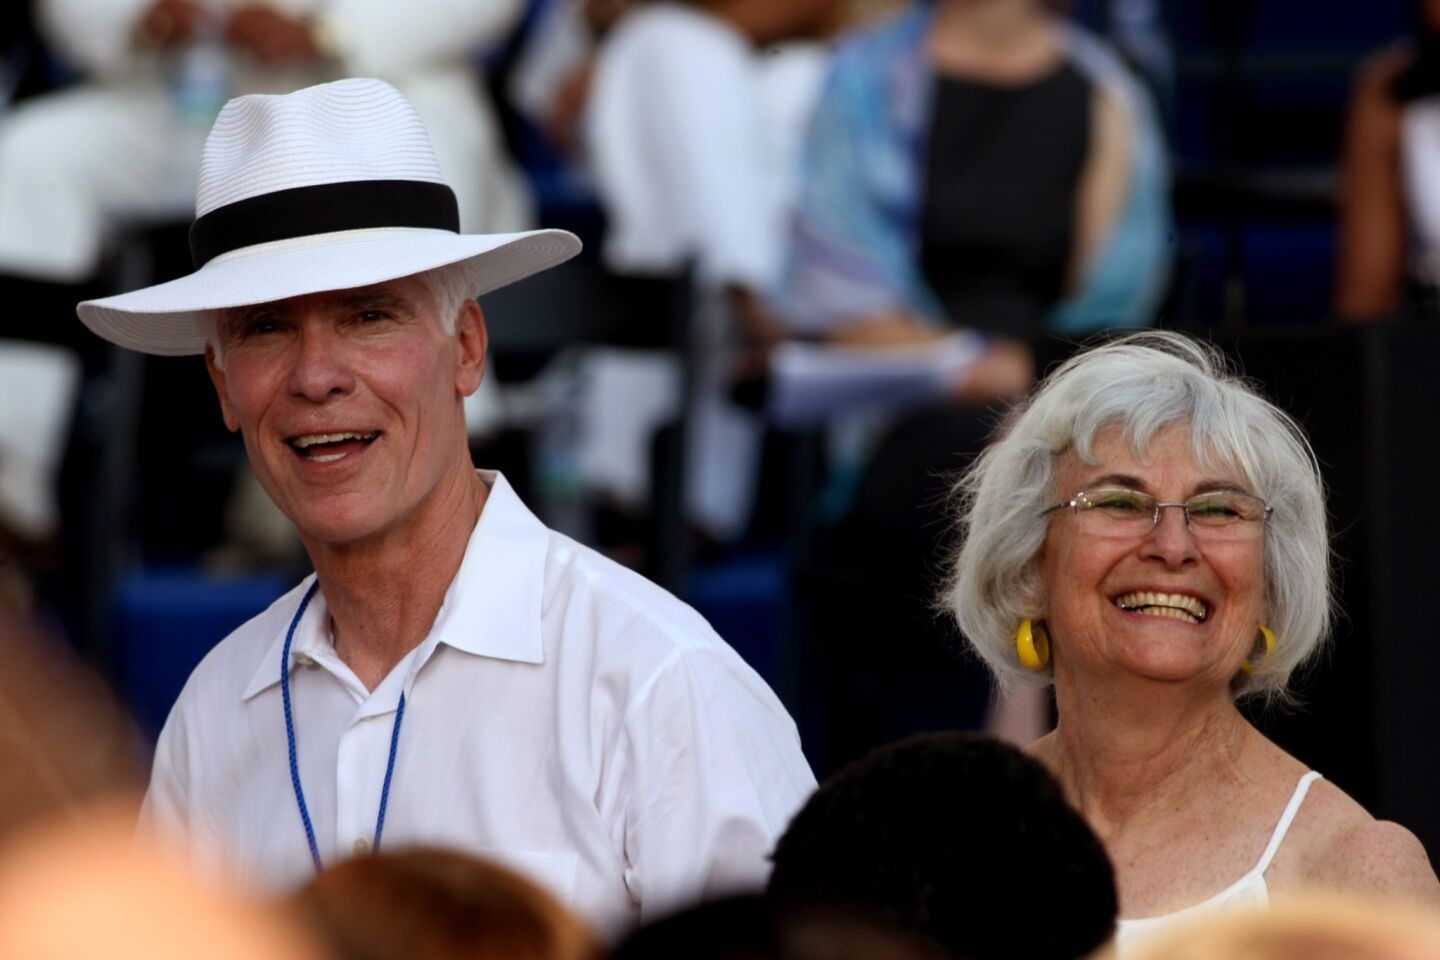 Eric Garcetti's parents, Gil Garcetti and Sukey Roth, are all smiles before their son is sworn-in.